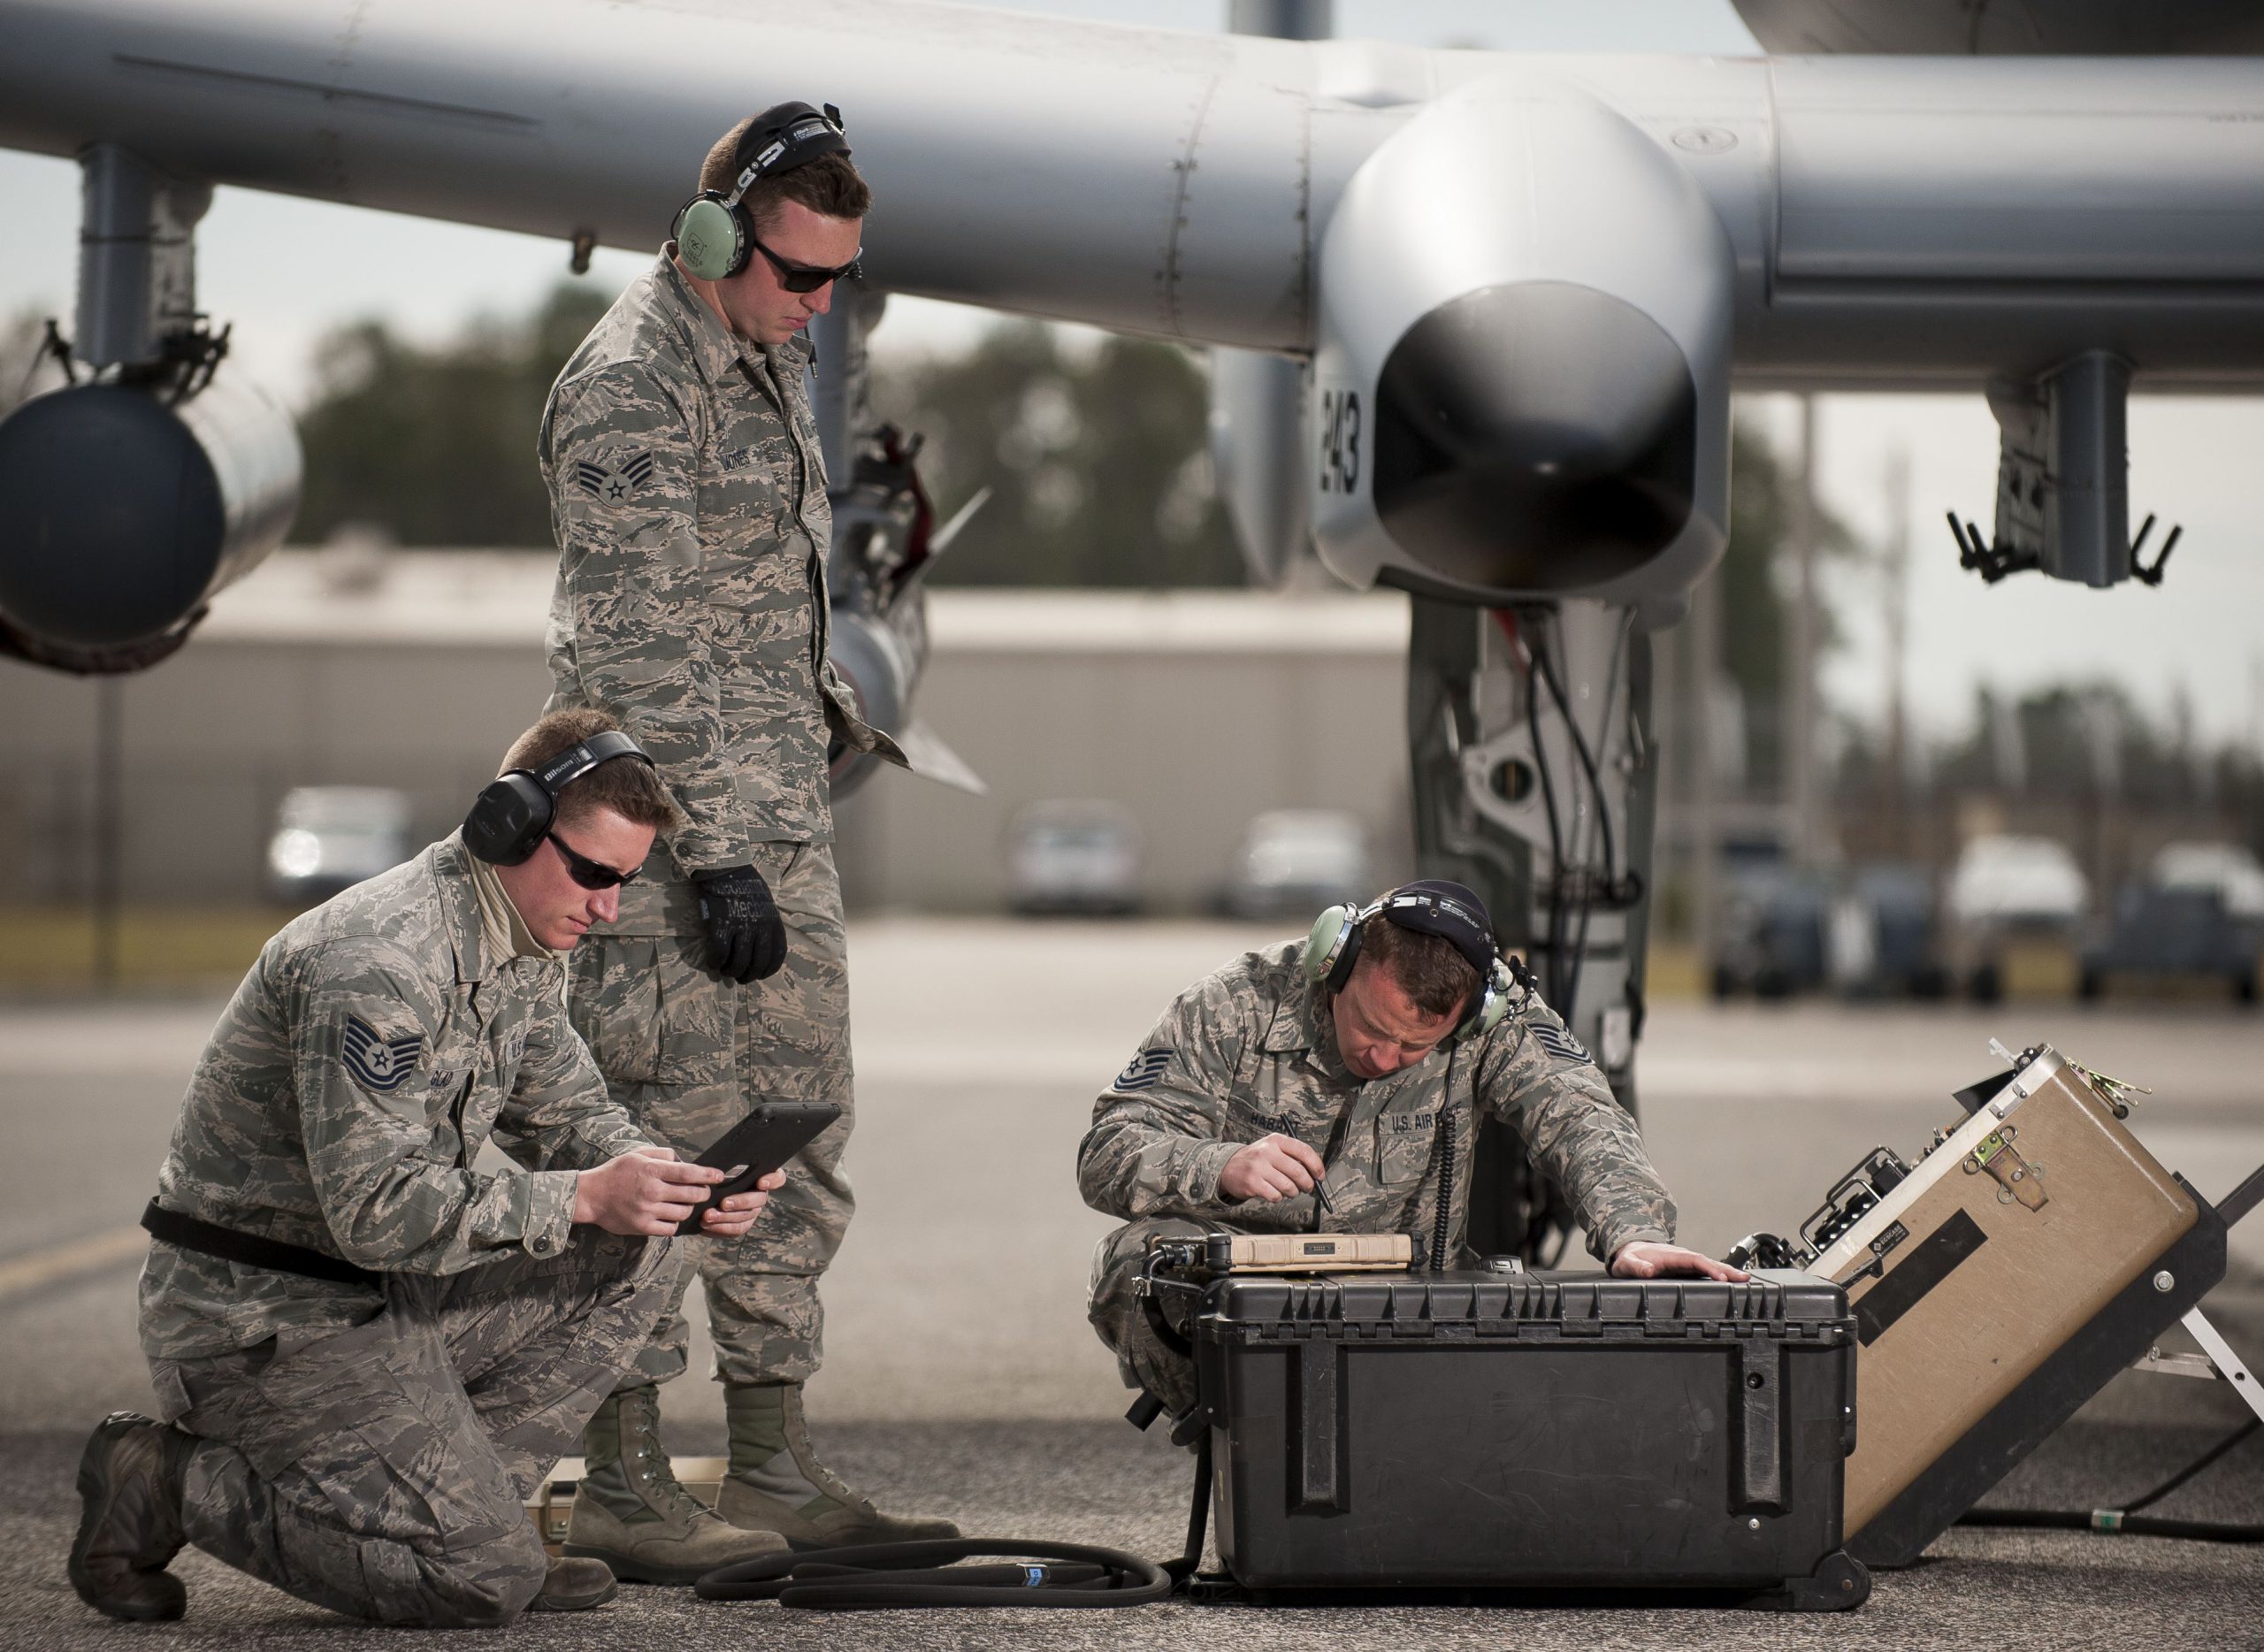 Tech. Sgt. Jack Glad, 122nd Weapons Load, left, Senior Airman Logan Jones, 122nd Avionics, and Tech. Sgt. Mathew Habart, 122nd Avionics, from the 122nd Fighter Wing, Fort Wayne, Ind., upload avionics software to an A-10C Thunderbolt II during Operation Guardian Blitz, Jan. 25, 2018, at MacDill Air Force Base, Fla. Guardian Blitz is a two-week joint exercise to improve service interoperability for combat search and rescue and close air support. U.S. Air National Guard photo by Staff Sgt. William Hopper. -